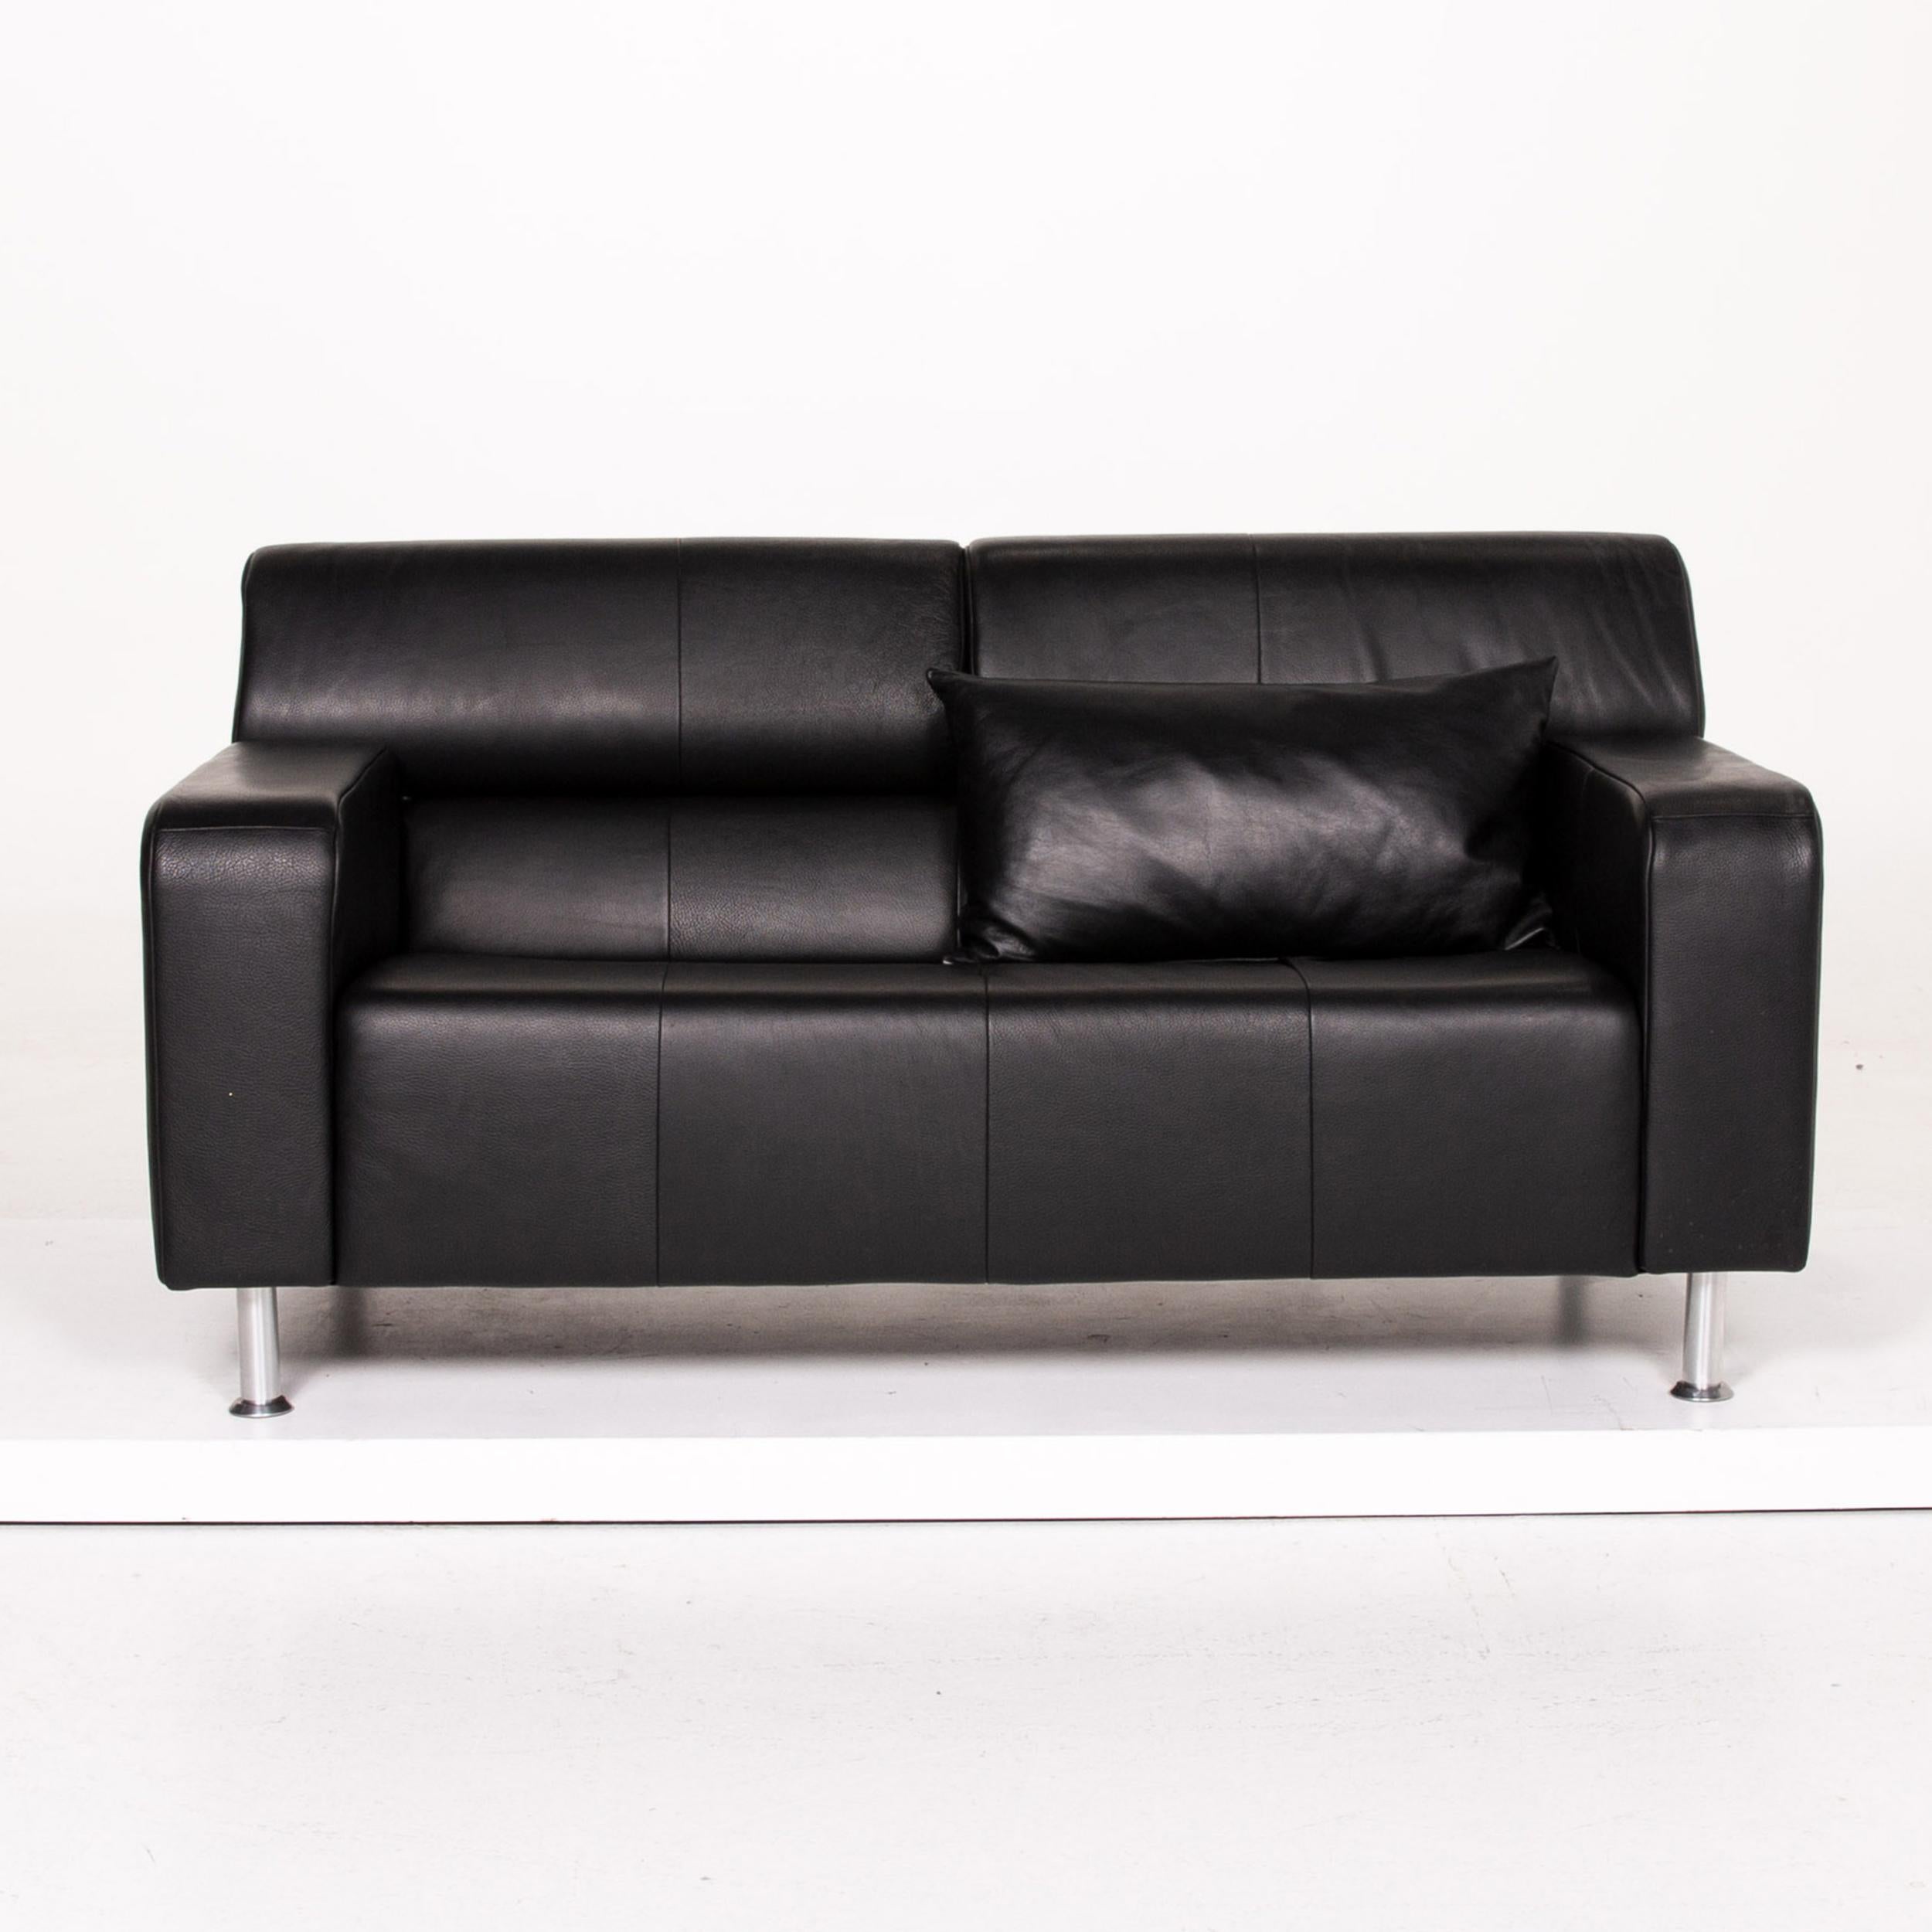 Rolf Benz AK 422 Leather Sofa Black Three-Seat Couch In Excellent Condition For Sale In Cologne, DE